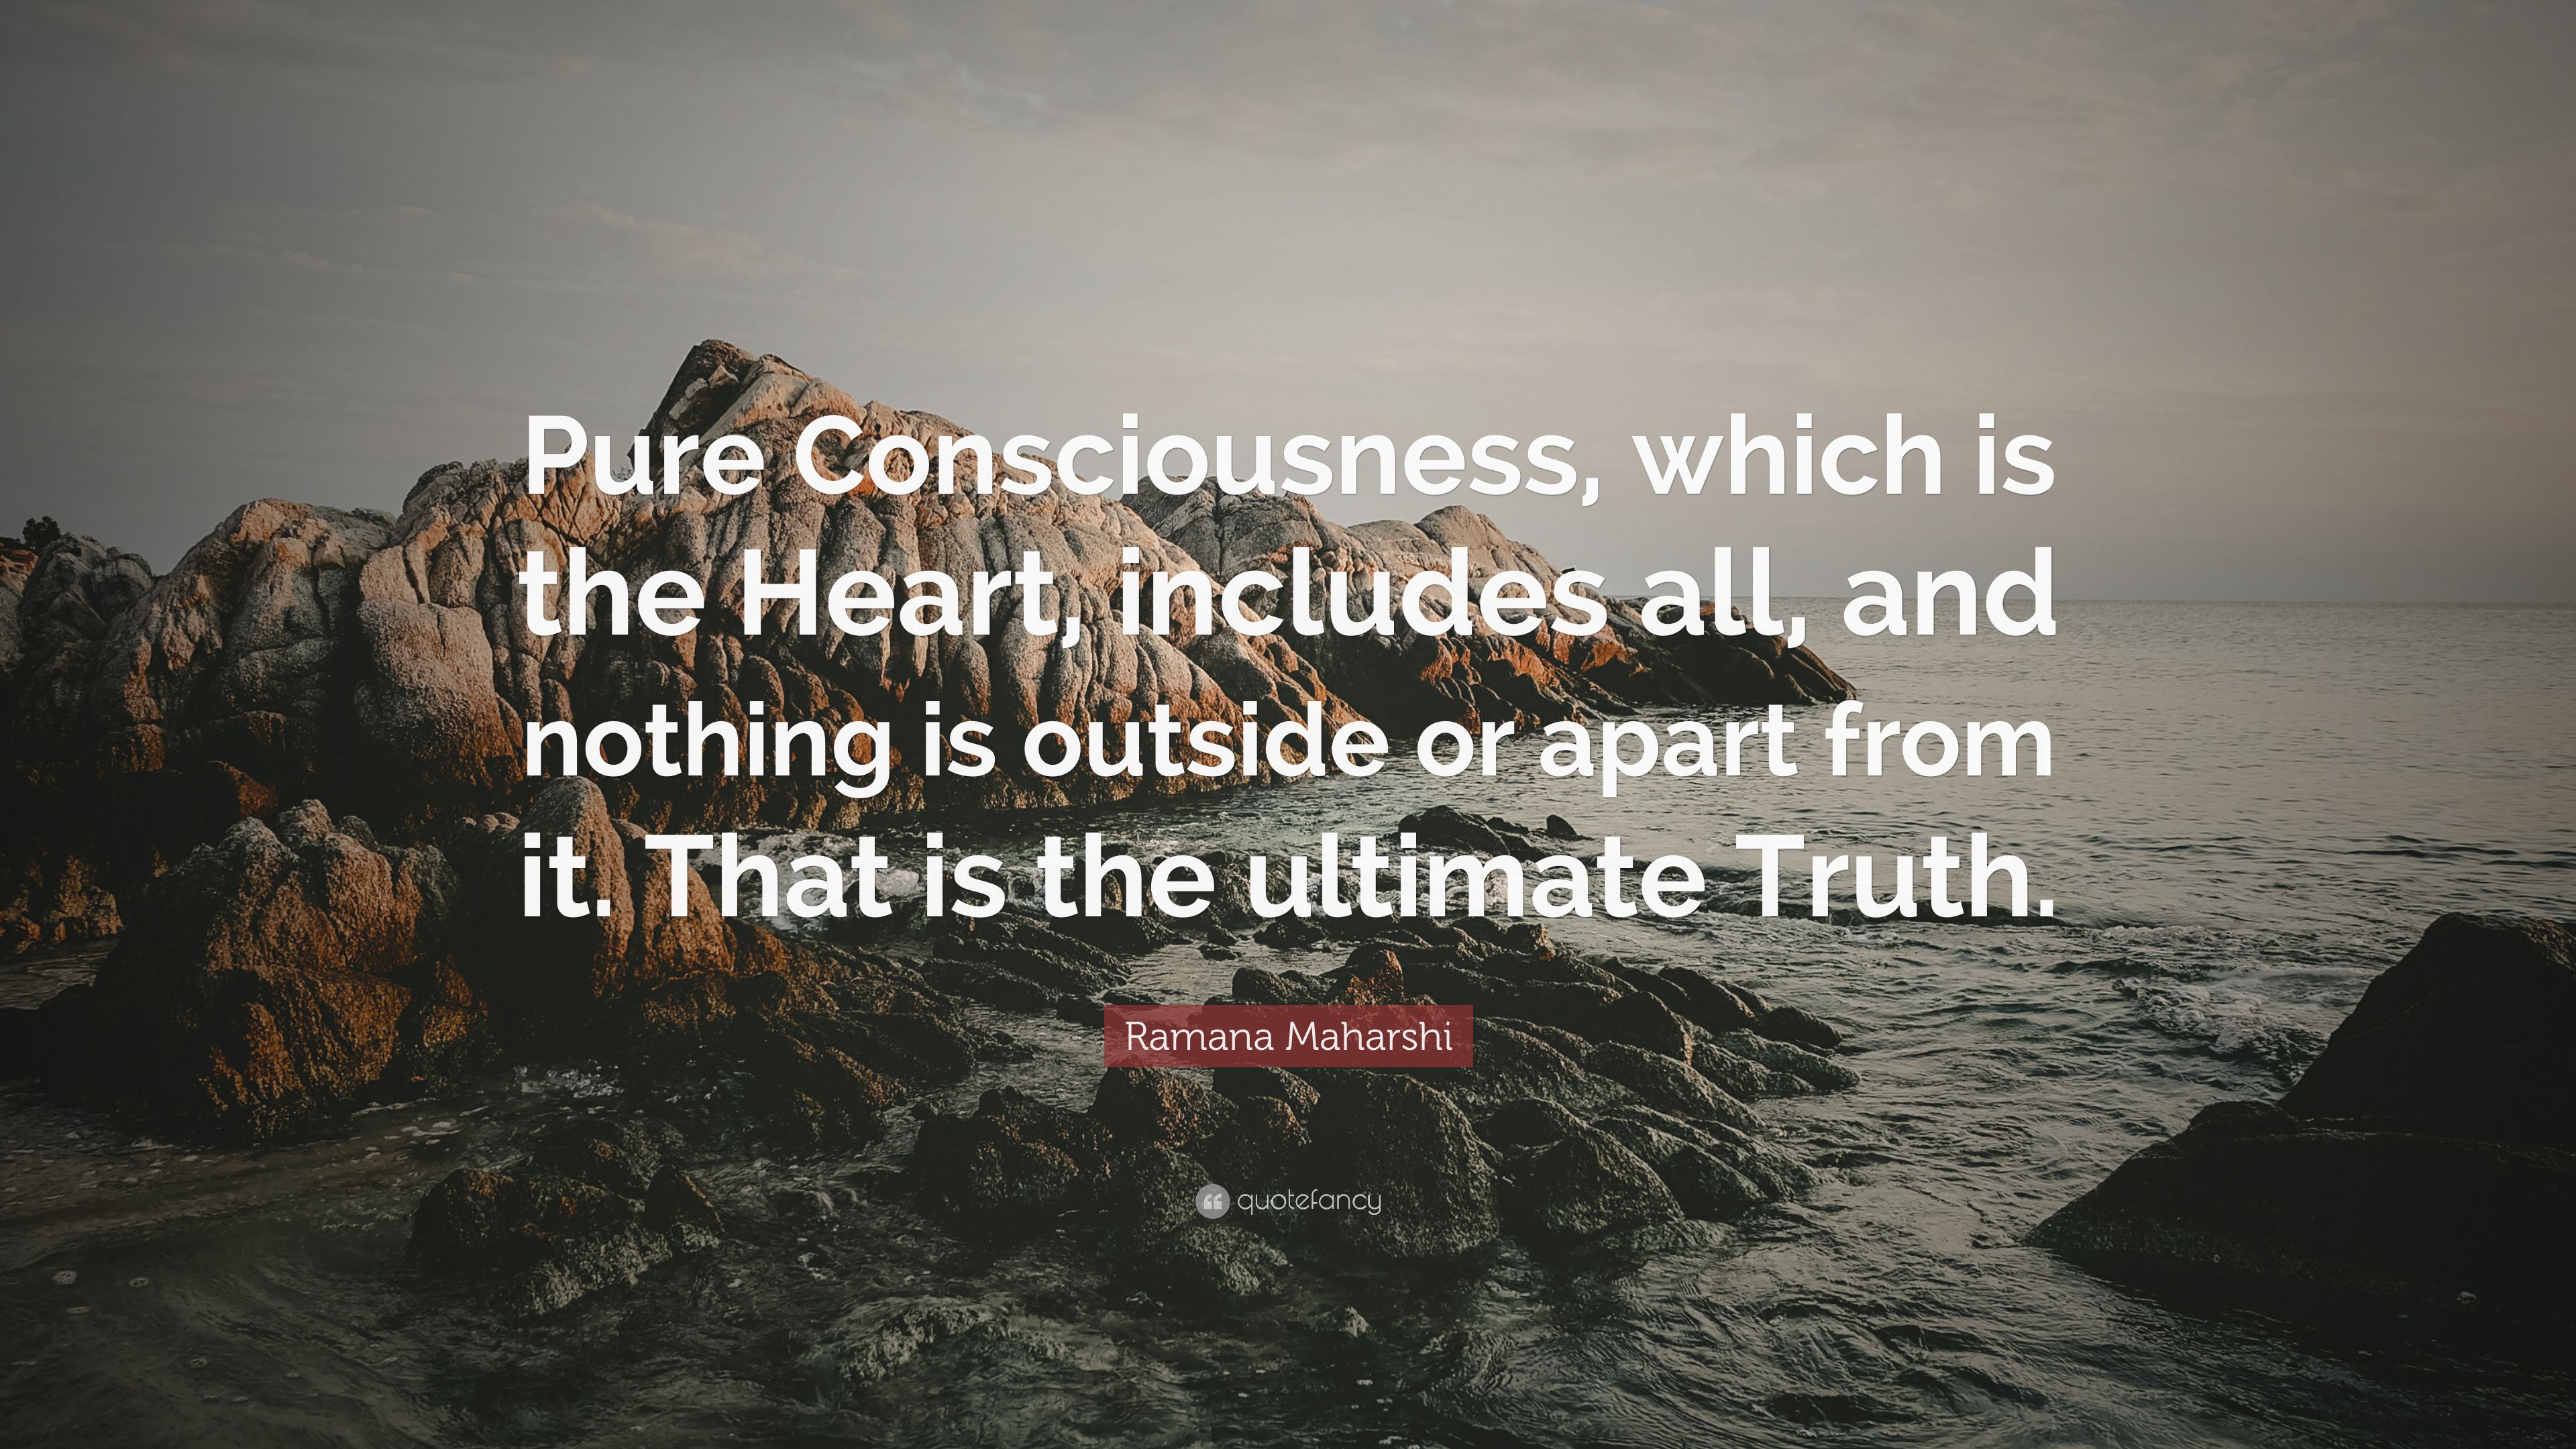 Ramana Maharshi Quote: “Pure Consciousness, which is the Heart